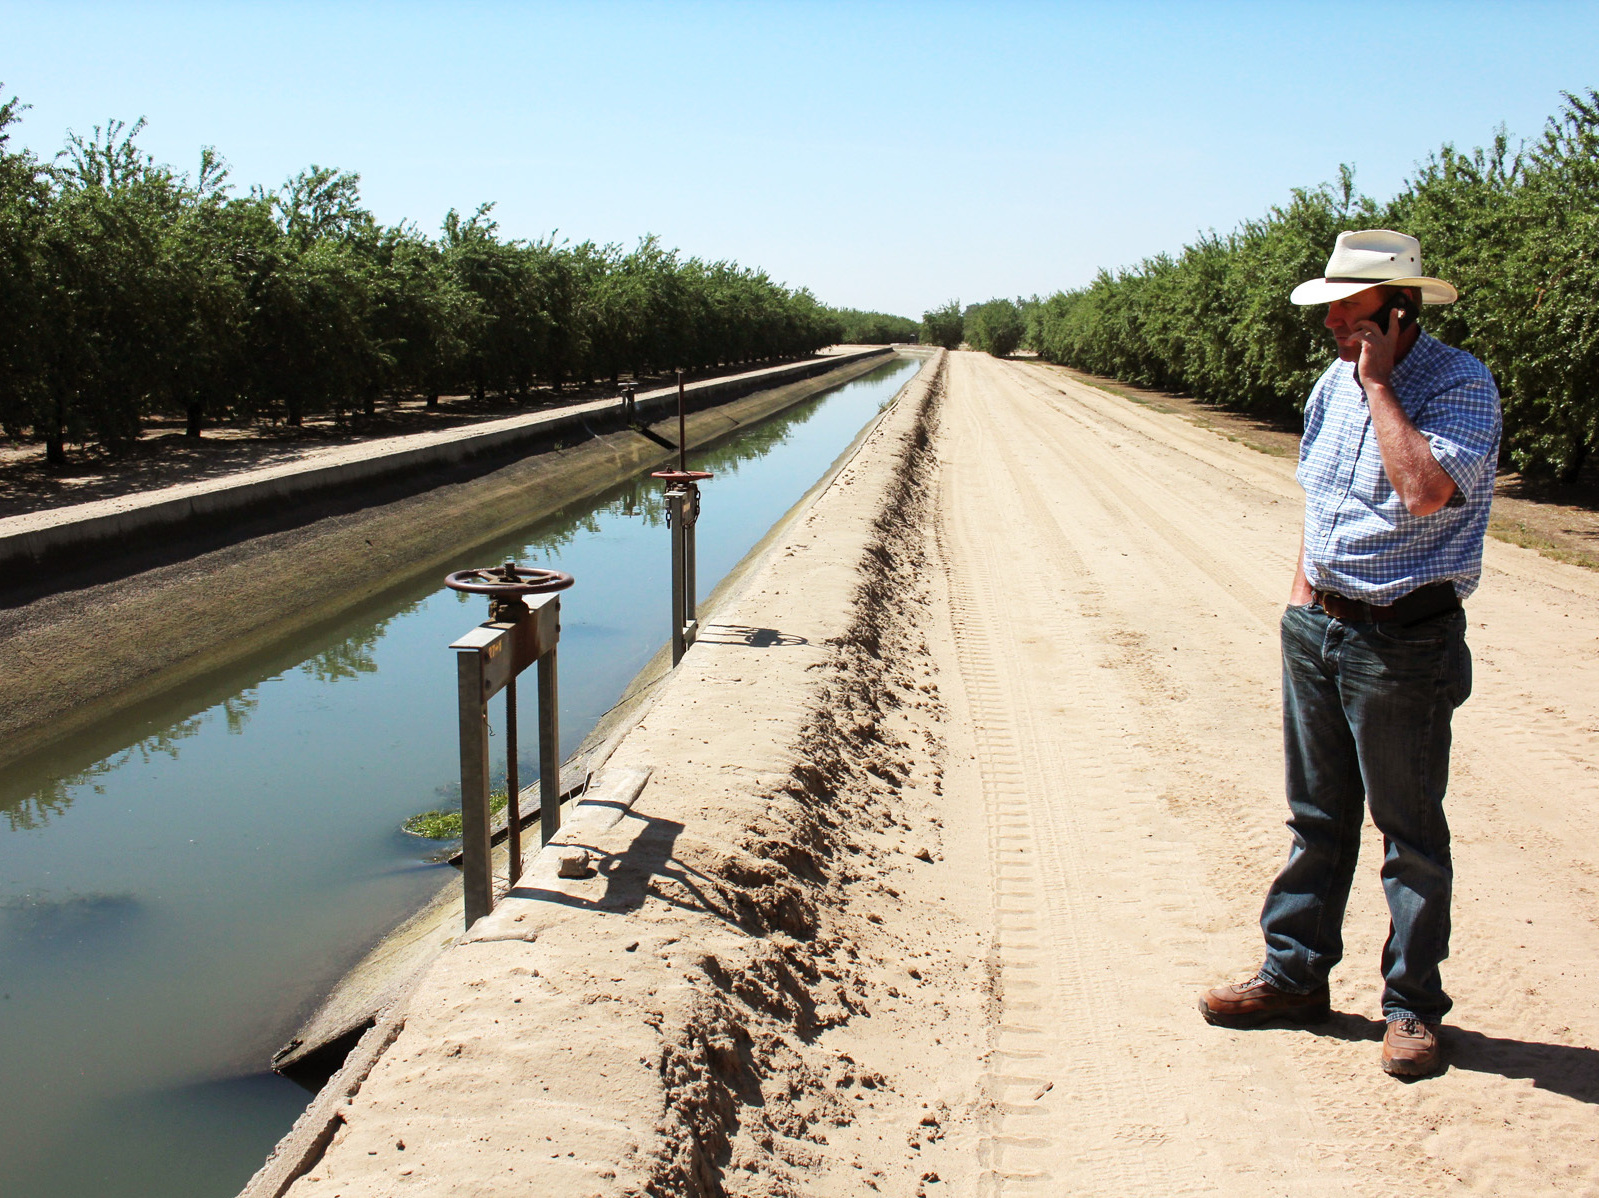 Allen Peterson's farm, near the city of Turlock, Calif., lies next to a concrete-lined canal full of water. He's one of the lucky ones. Photo: Dan Charles/NPR